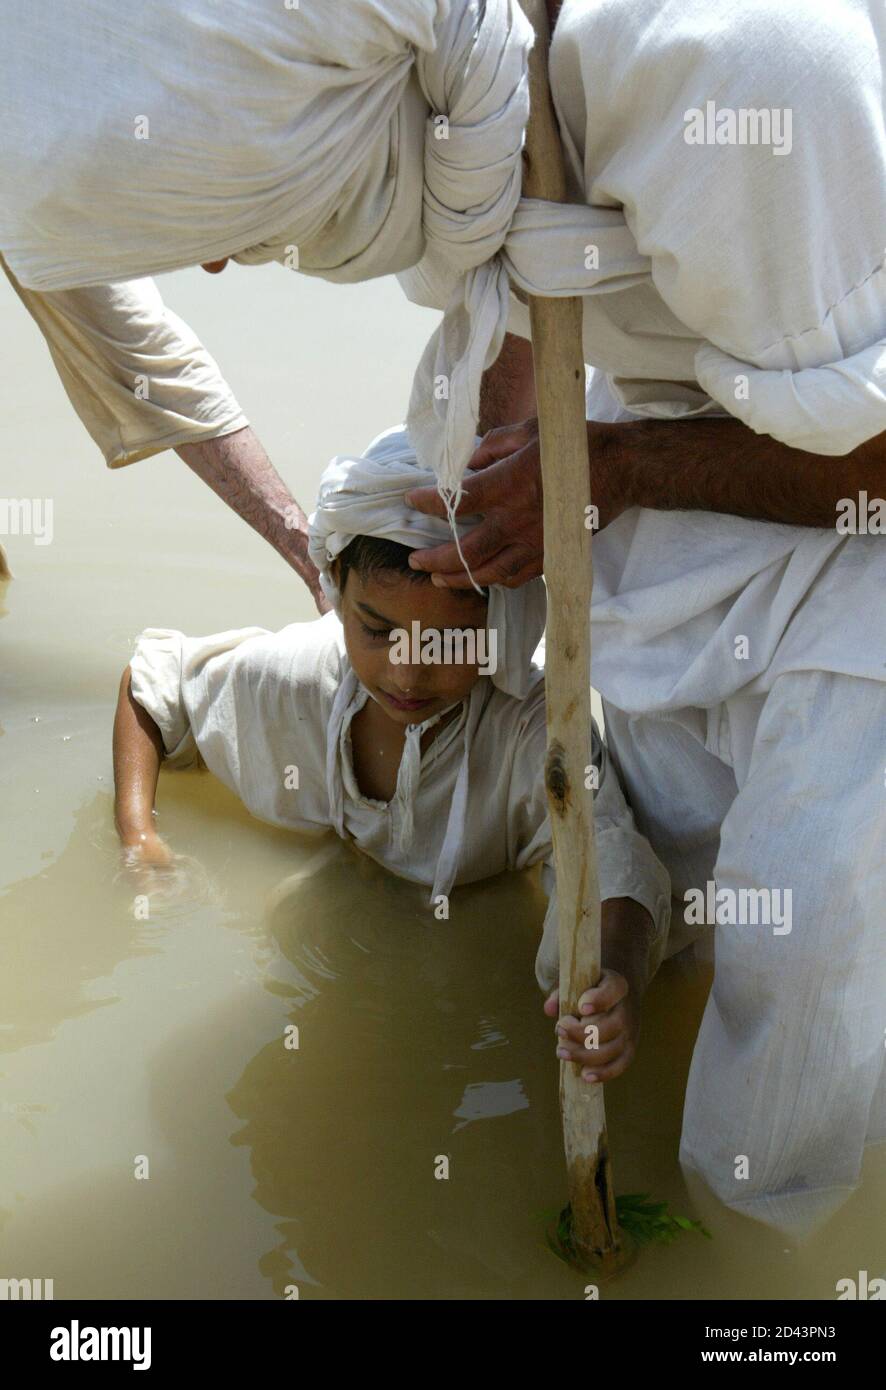 A young Iraqi Mandean boy is baptised in the Tigris river by a priest speaking the ancient Aramaic language during a wedding ceremony in Baghdad June 8, 2003. Iraqi devotees of an obscure religion who take John the Baptist as their central figure perform virginity tests on their brides and take a dip in the murky Tigris river every Sunday to purify the soul. Most of the world's 20,000 or so Mandeans live in southern Iraq and southwestern Iran. Stock Photo